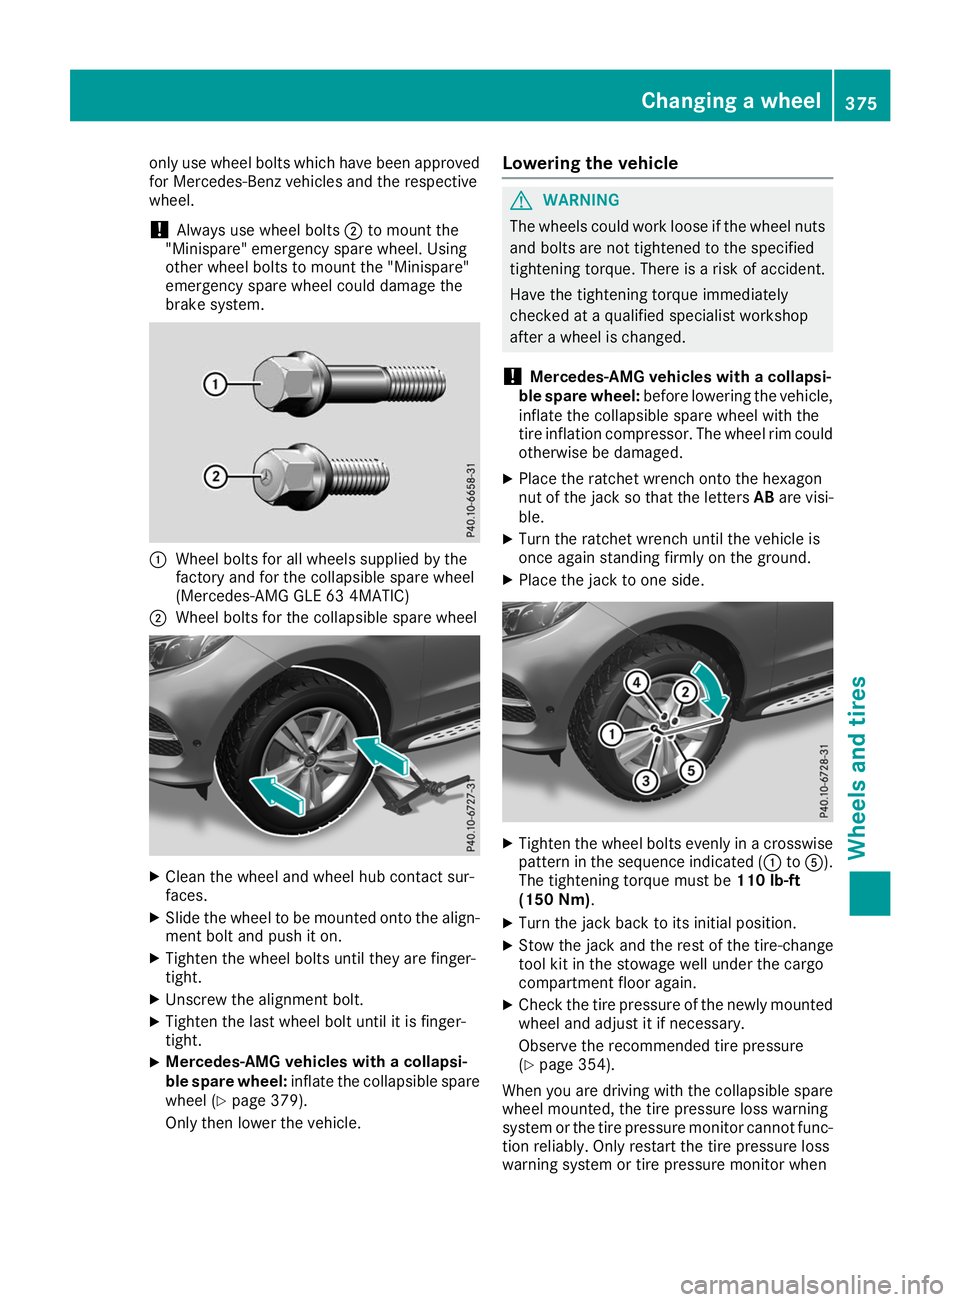 MERCEDES-BENZ GLE SUV 2019  Owners Manual only use wheel bolts which have been approved
for Mercedes-Benz vehicles and the respective
wheel.
! Always use wheel bolts
0044to mount the
"Minispare" emergency spare wheel. Using
other whee